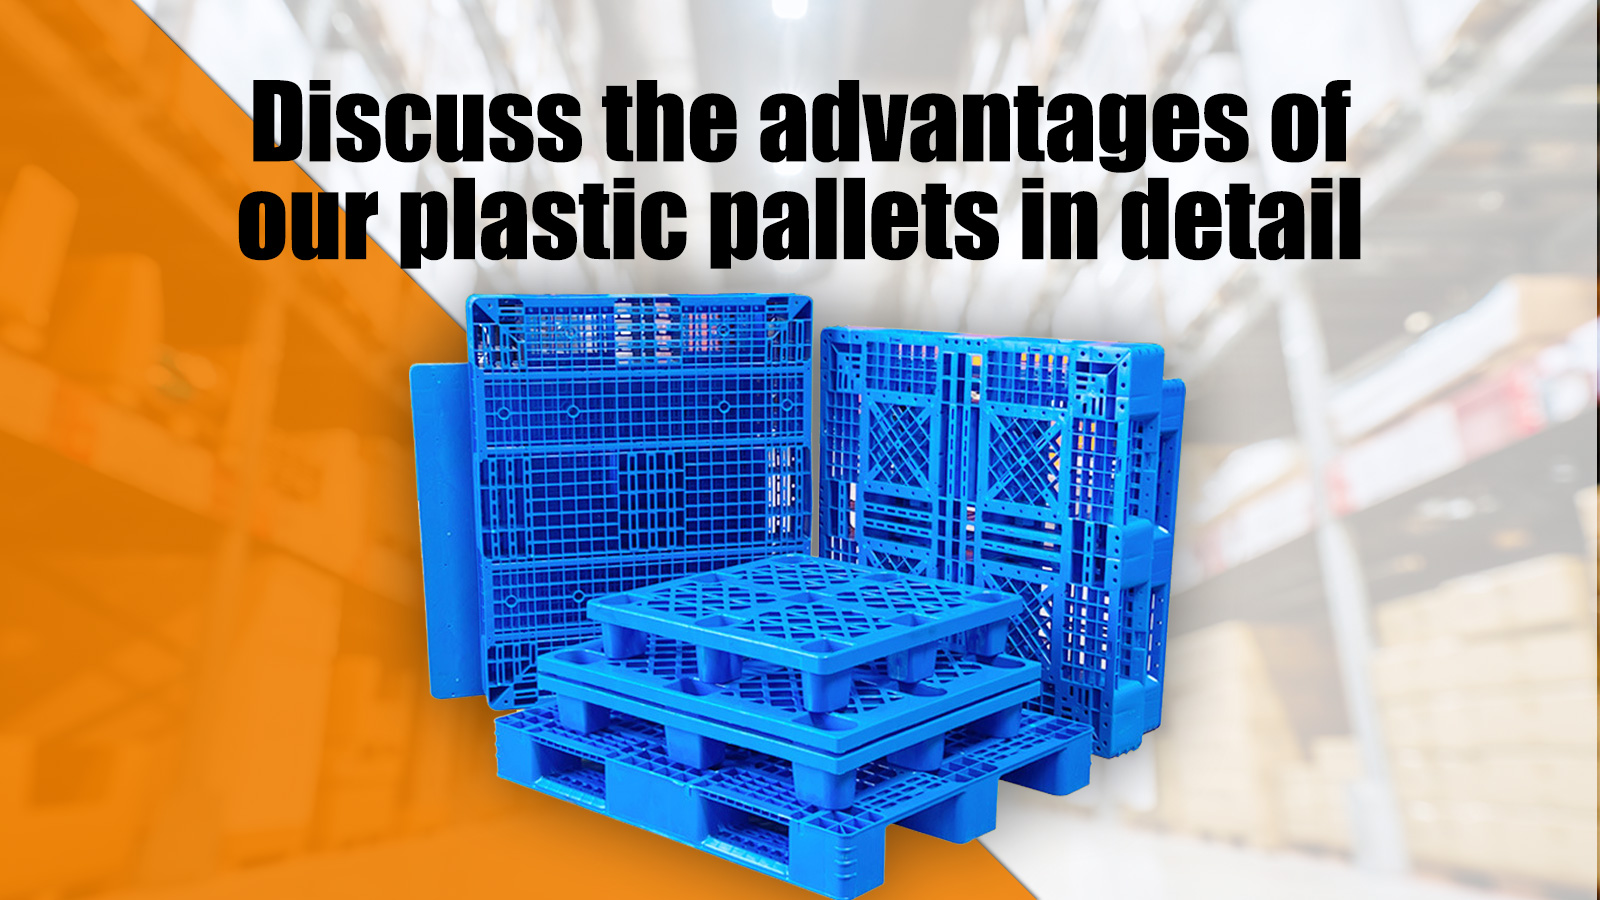 Discuss the advantages of our plastic pallets in detail